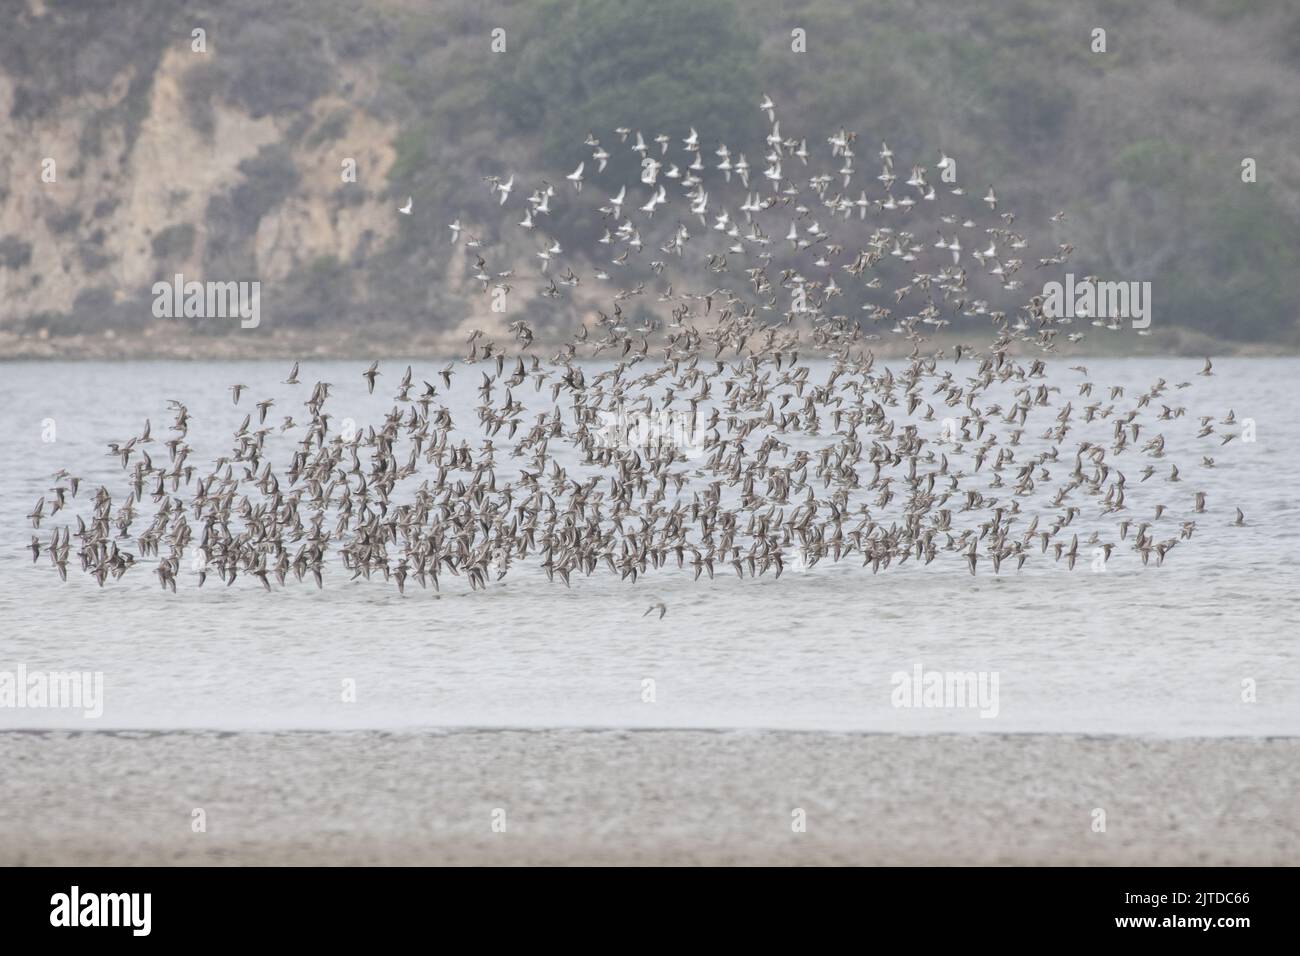 A flock of least sandpipers (Calidris minutilla) in flight in Point Reyes National seashore in California, the birds are flocking in large groups. Stock Photo